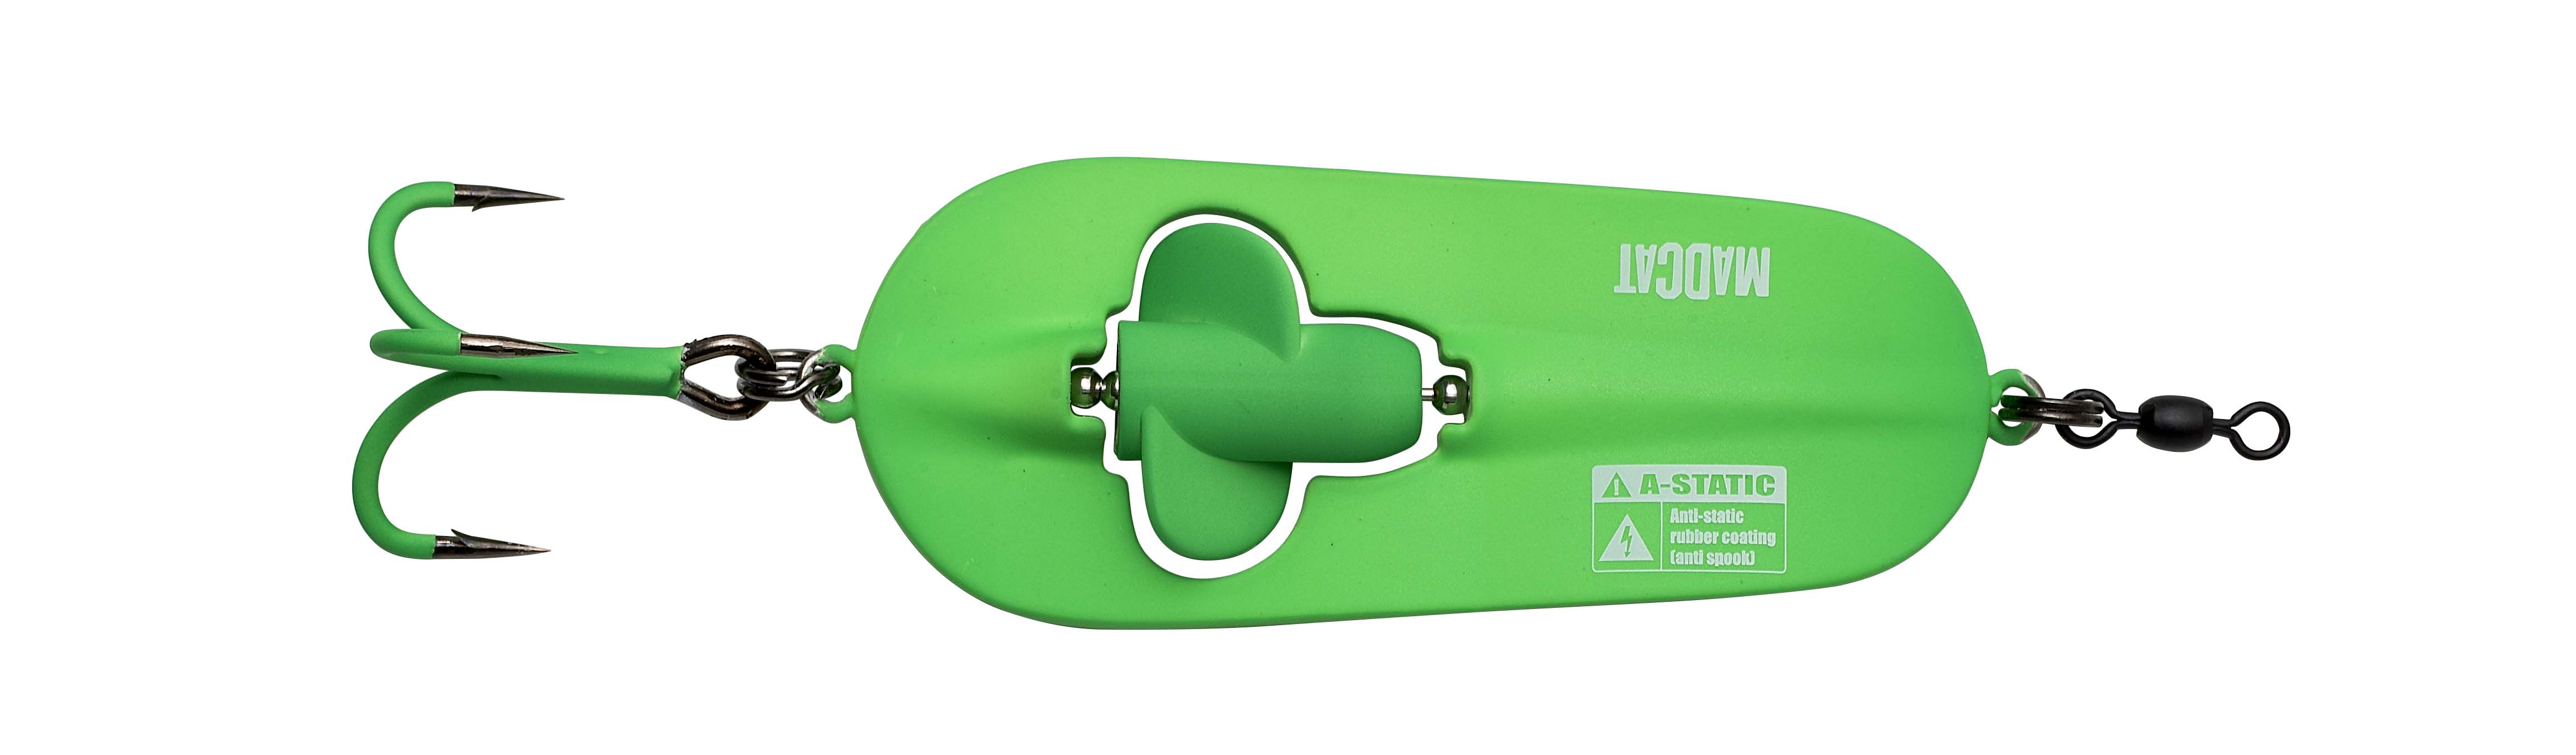 Madcat A-Static Ratlin' Meerval Spoon (110g) - Green